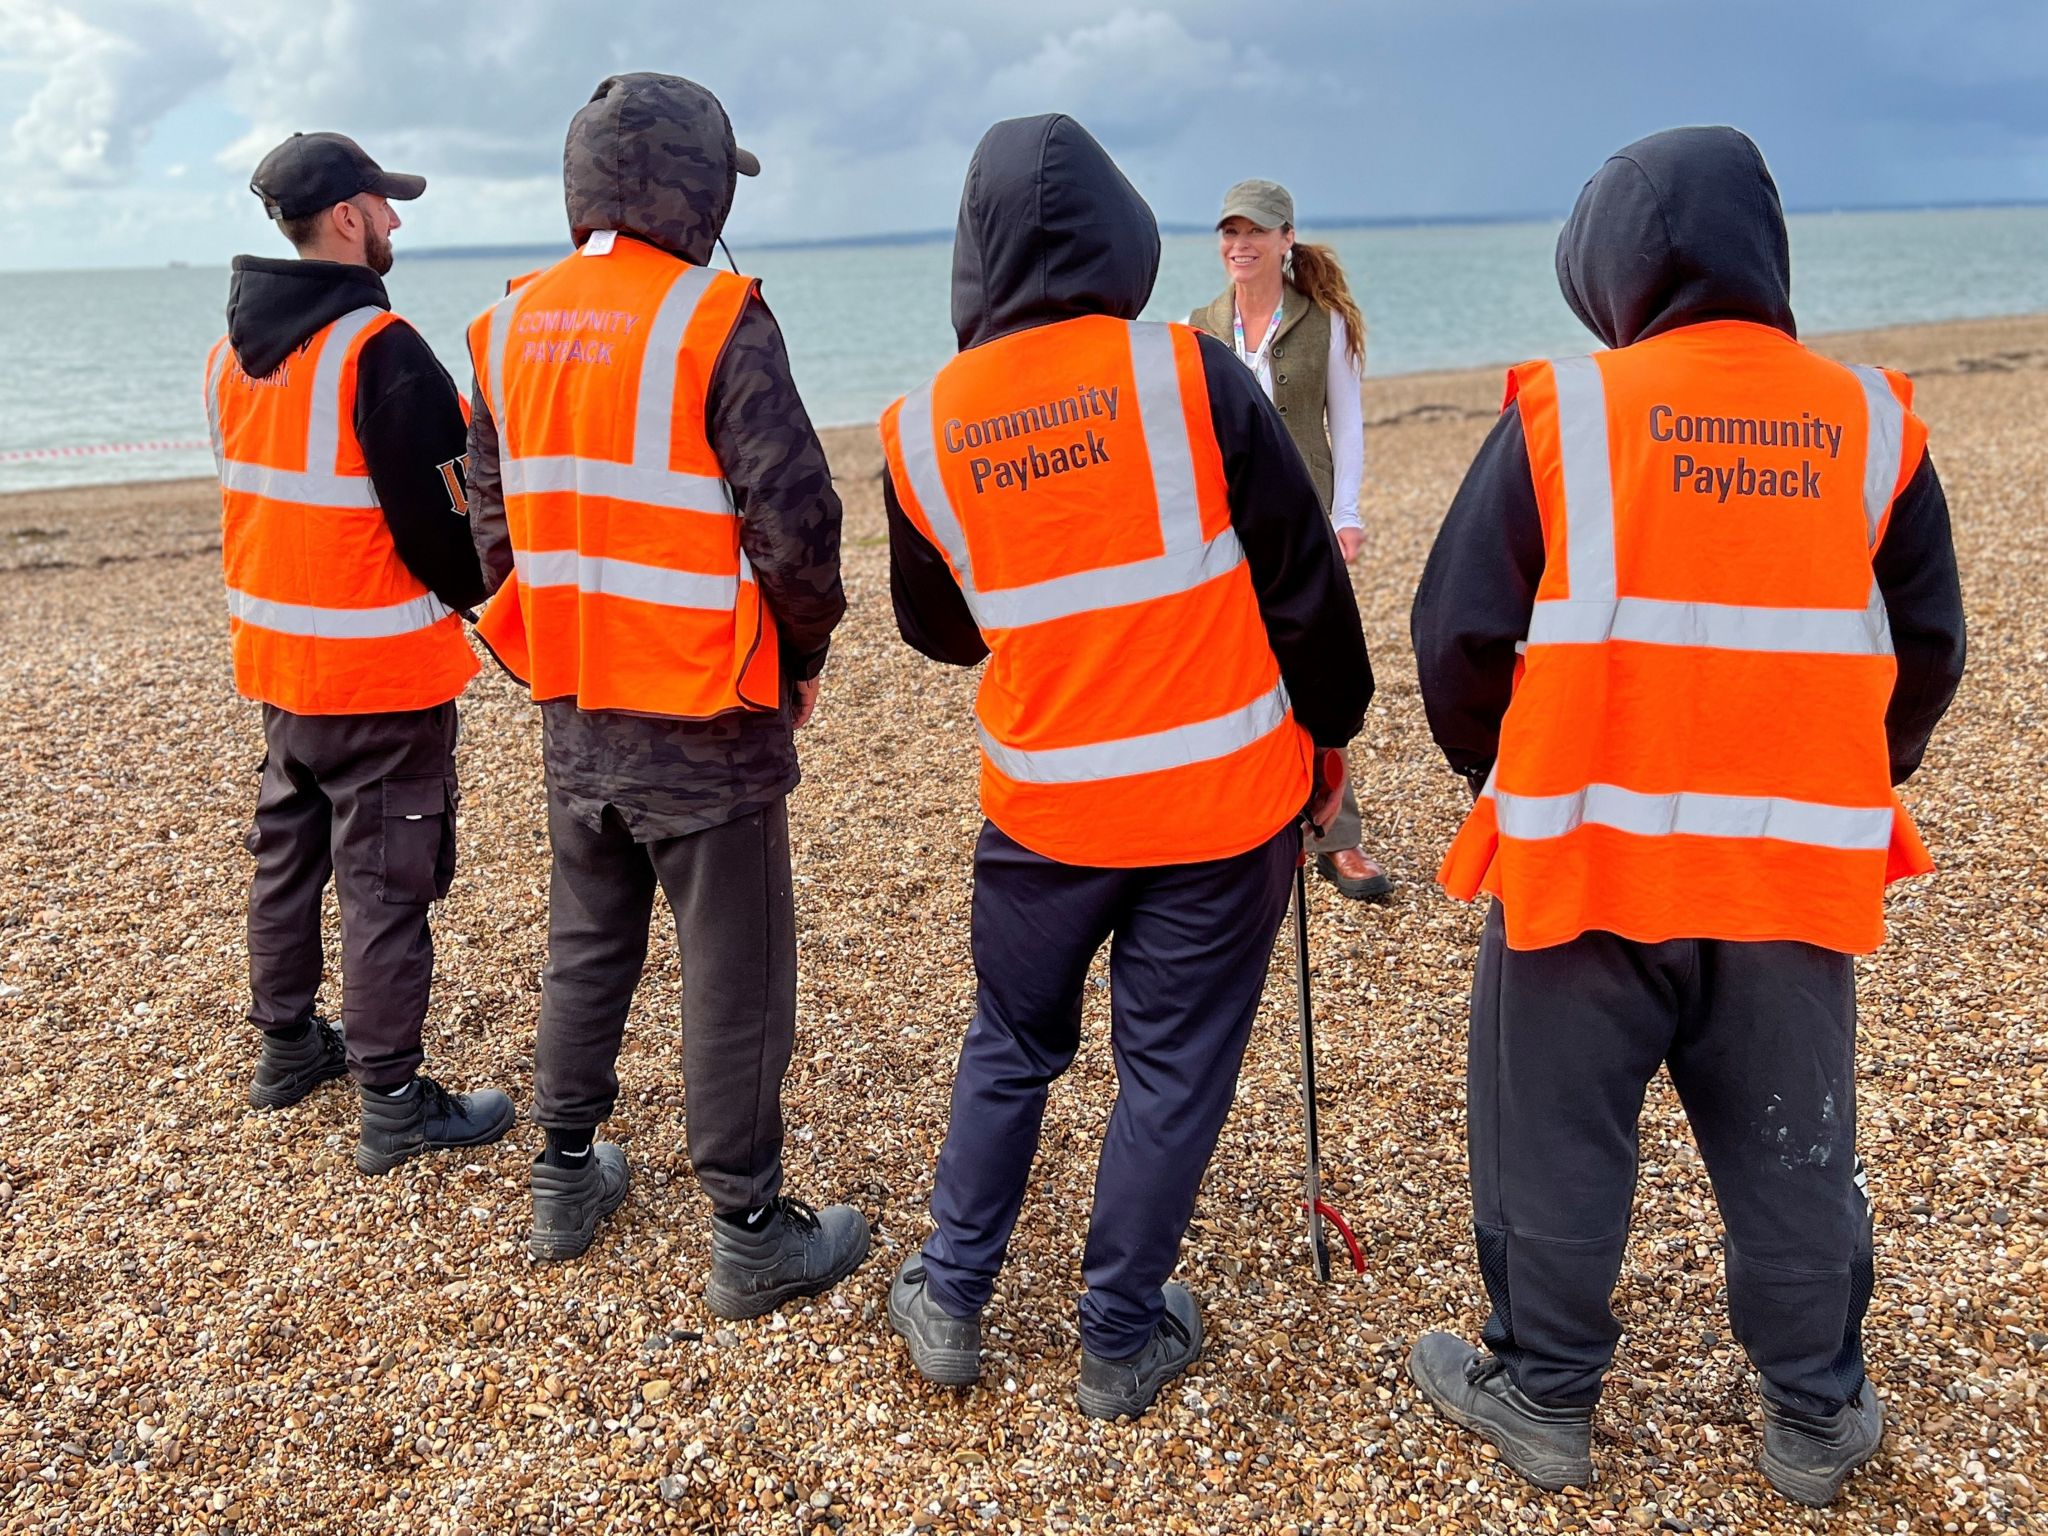 Offenders in fluorescent orange jackets standing on a beach